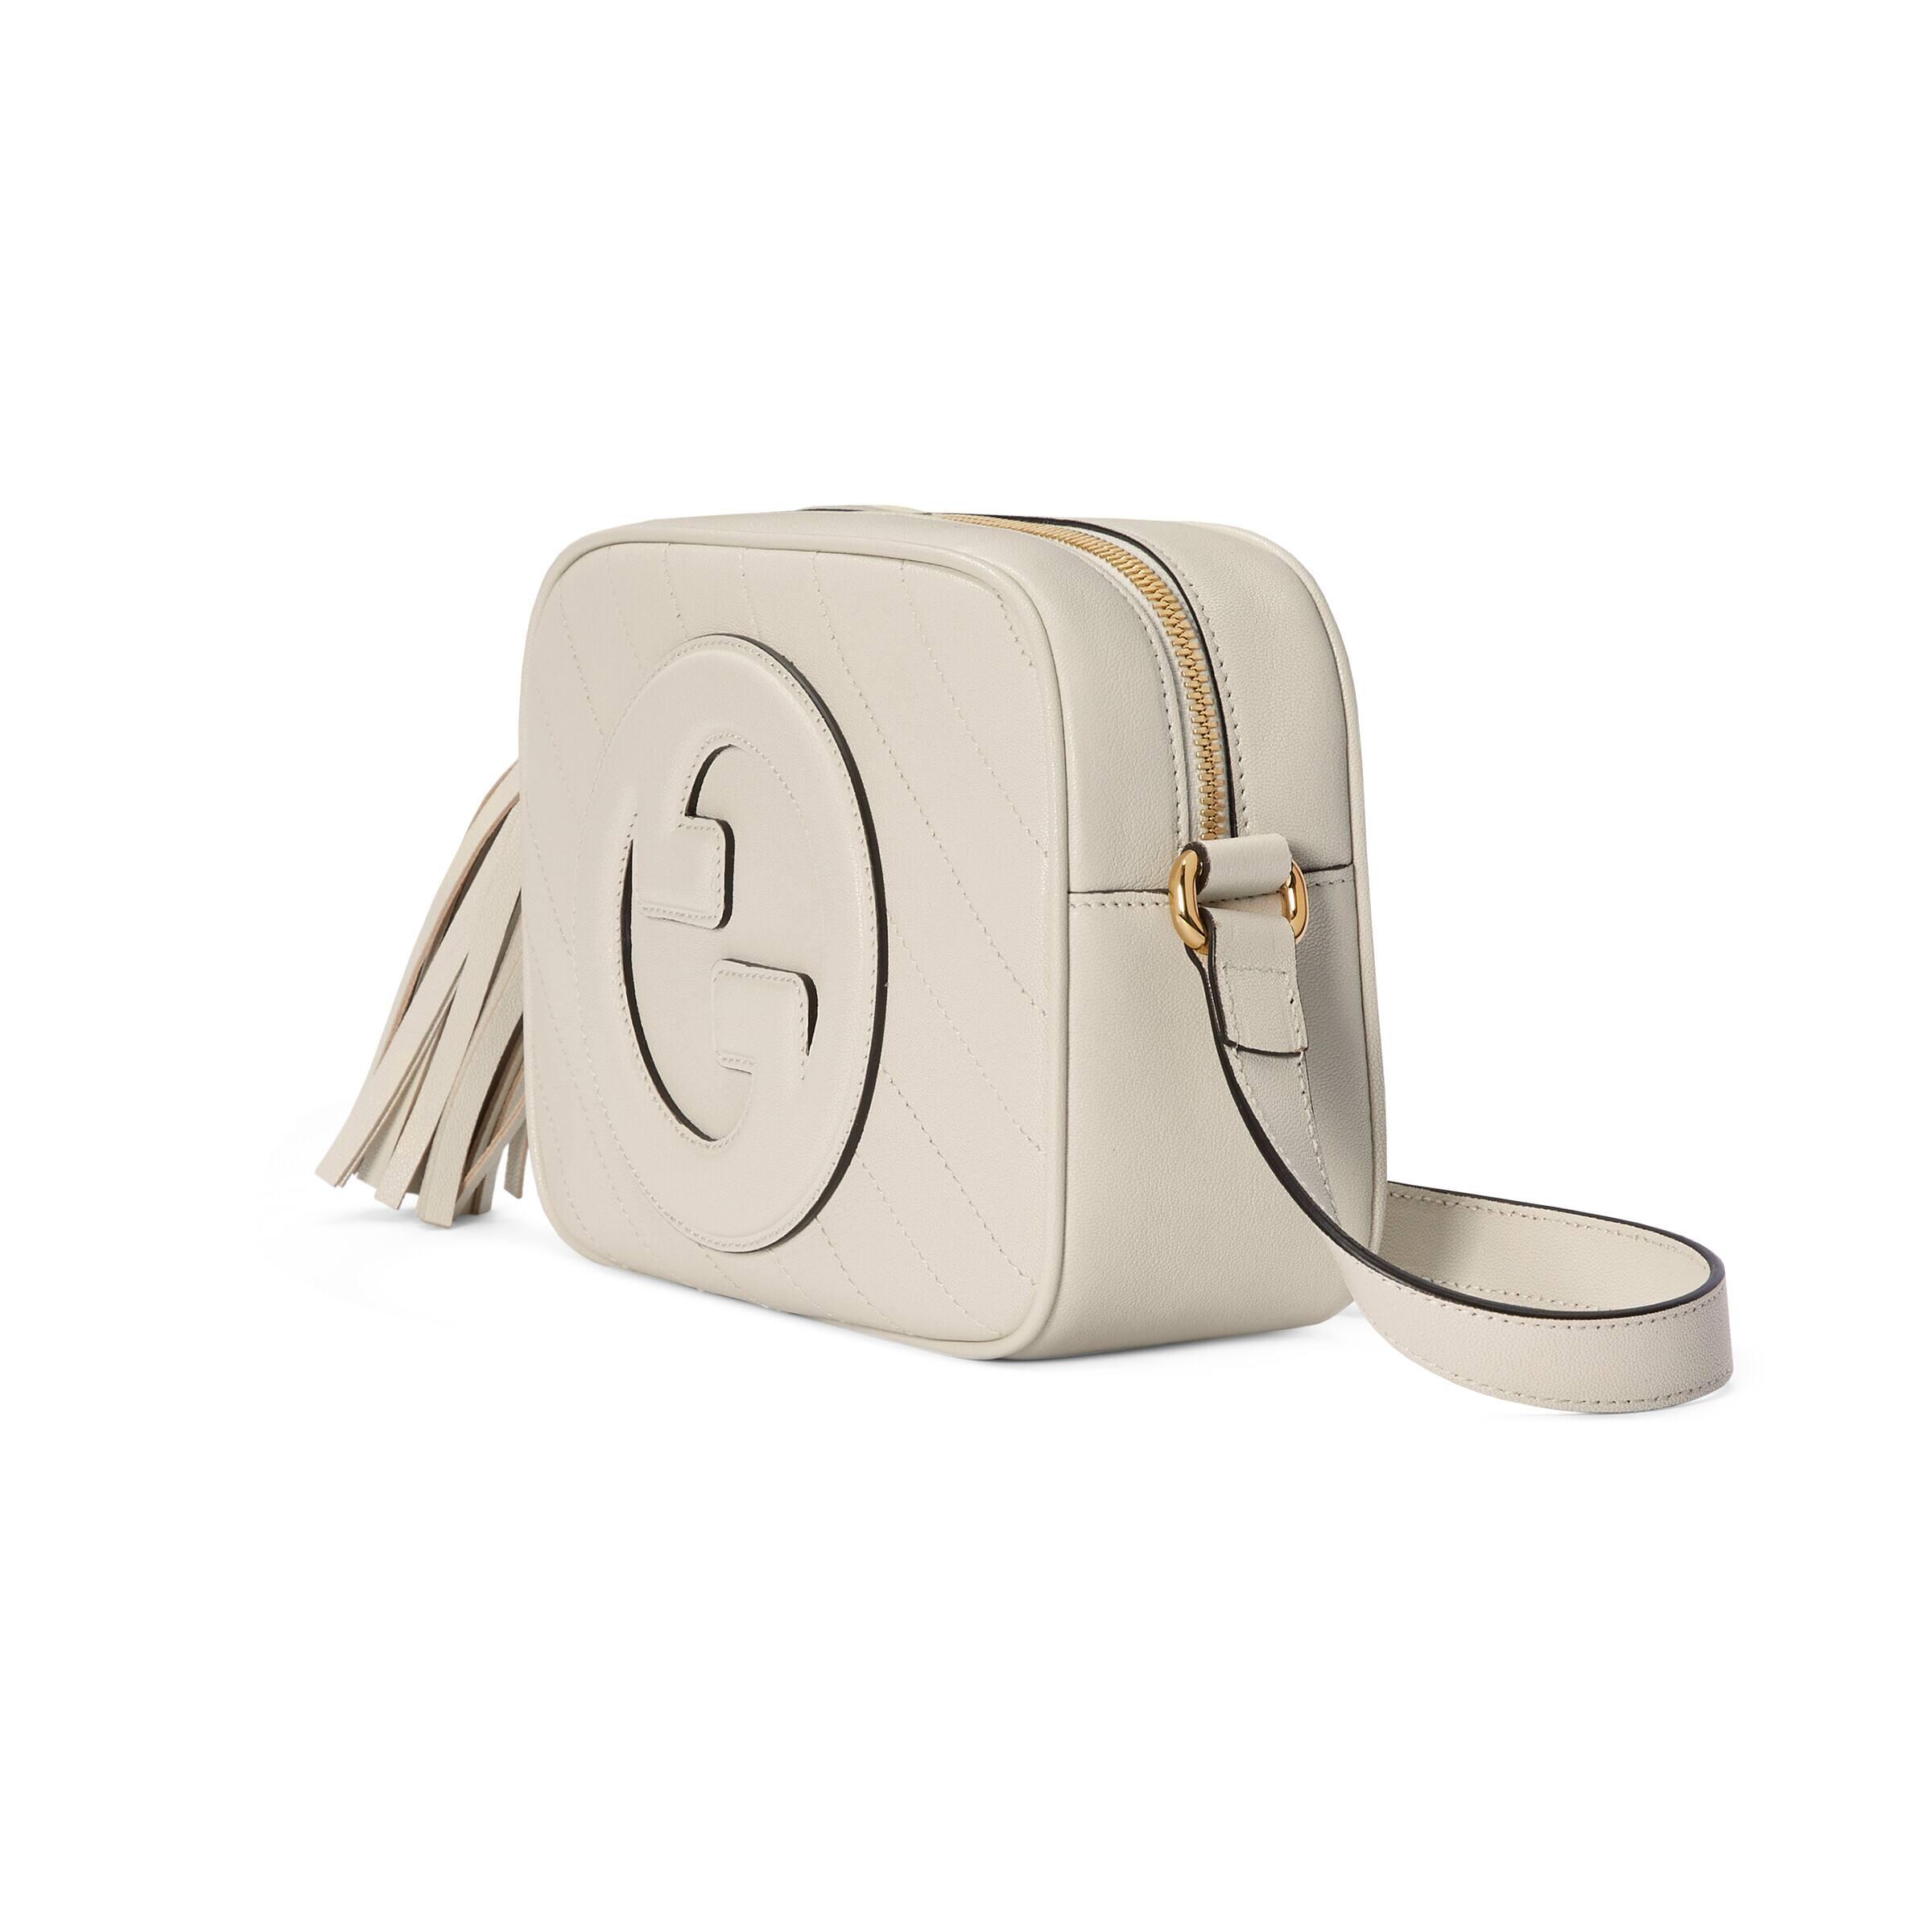 Gucci Blondie Small Shoulder Bag in Natural | Lyst